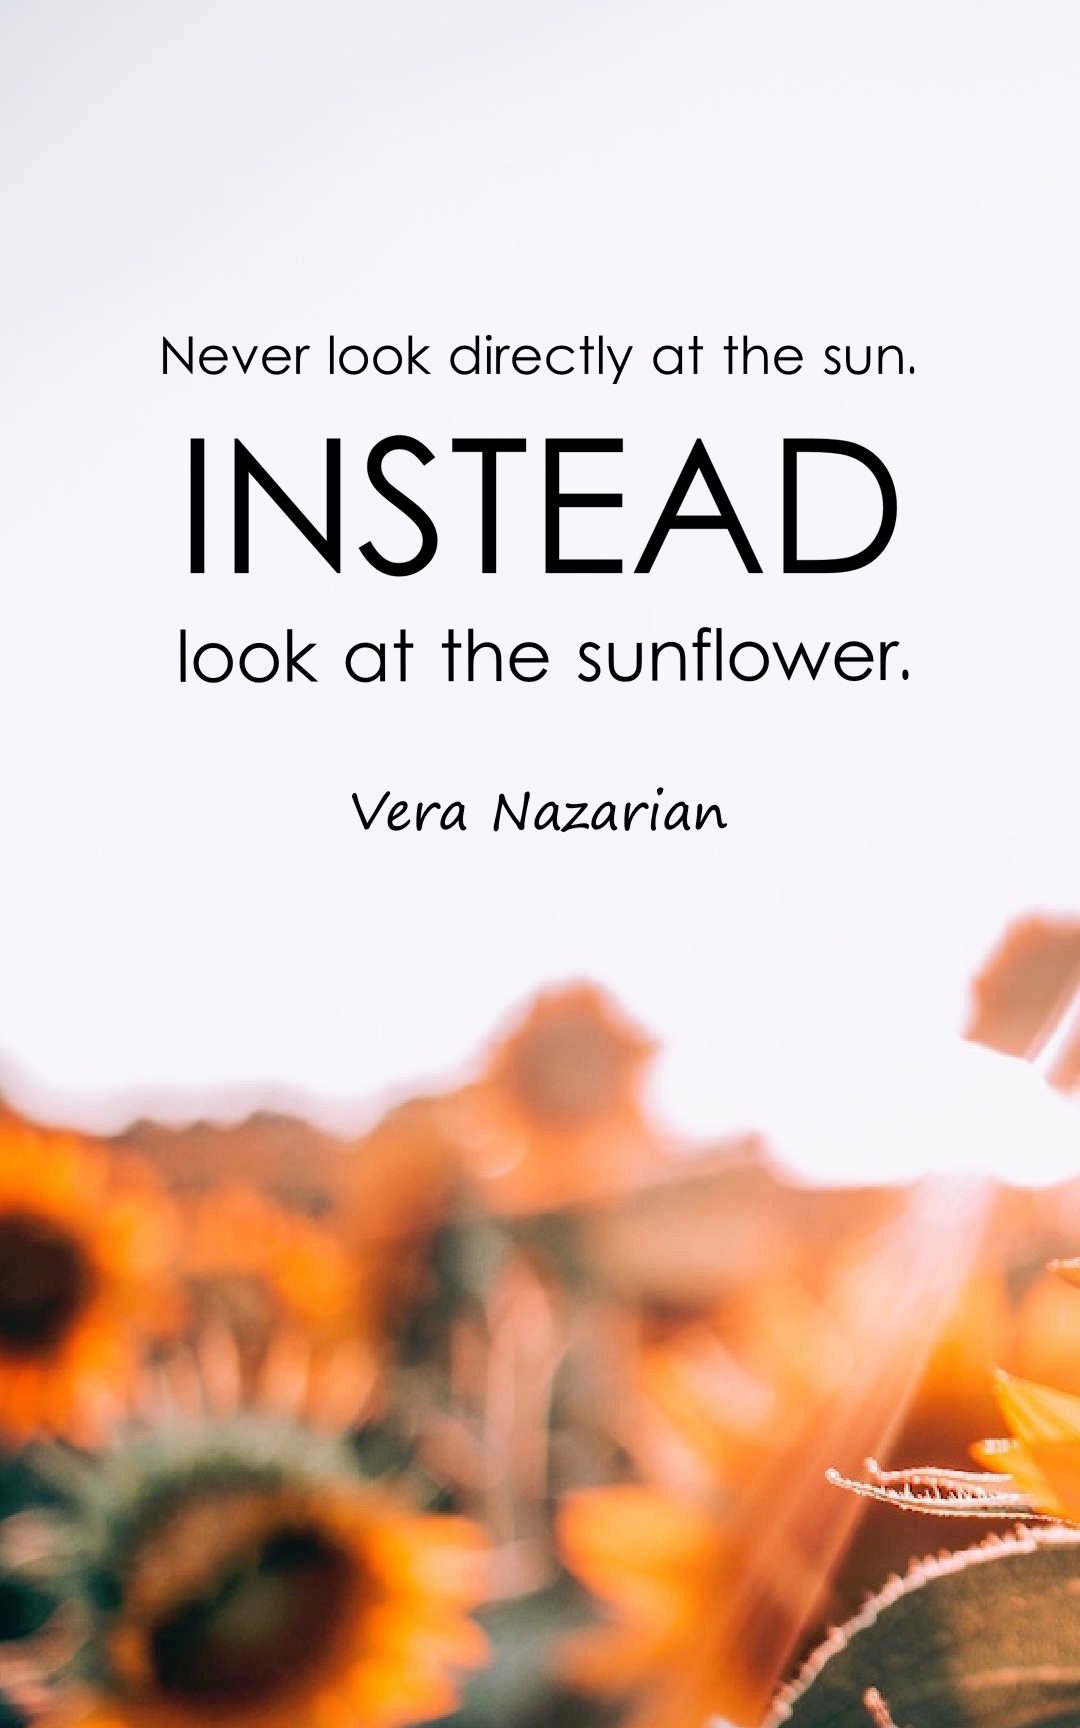 Never look directly at the sun. Instead, look at the sunflower.